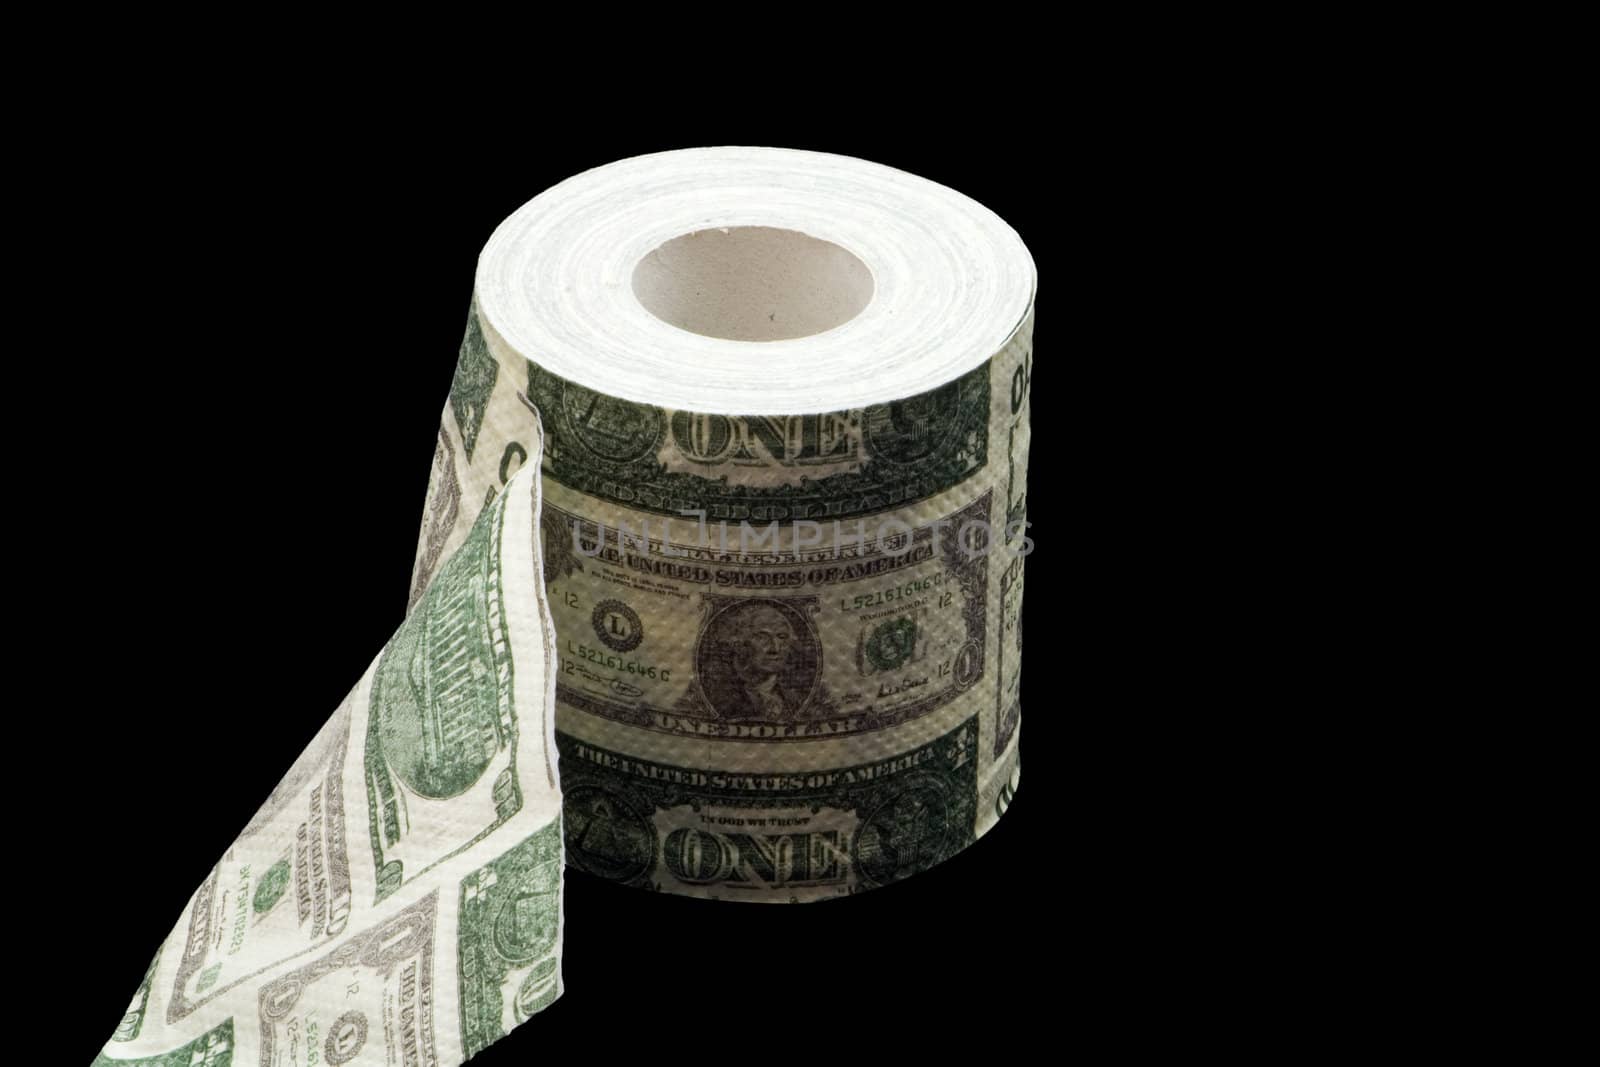 American Toilet Paper by werg